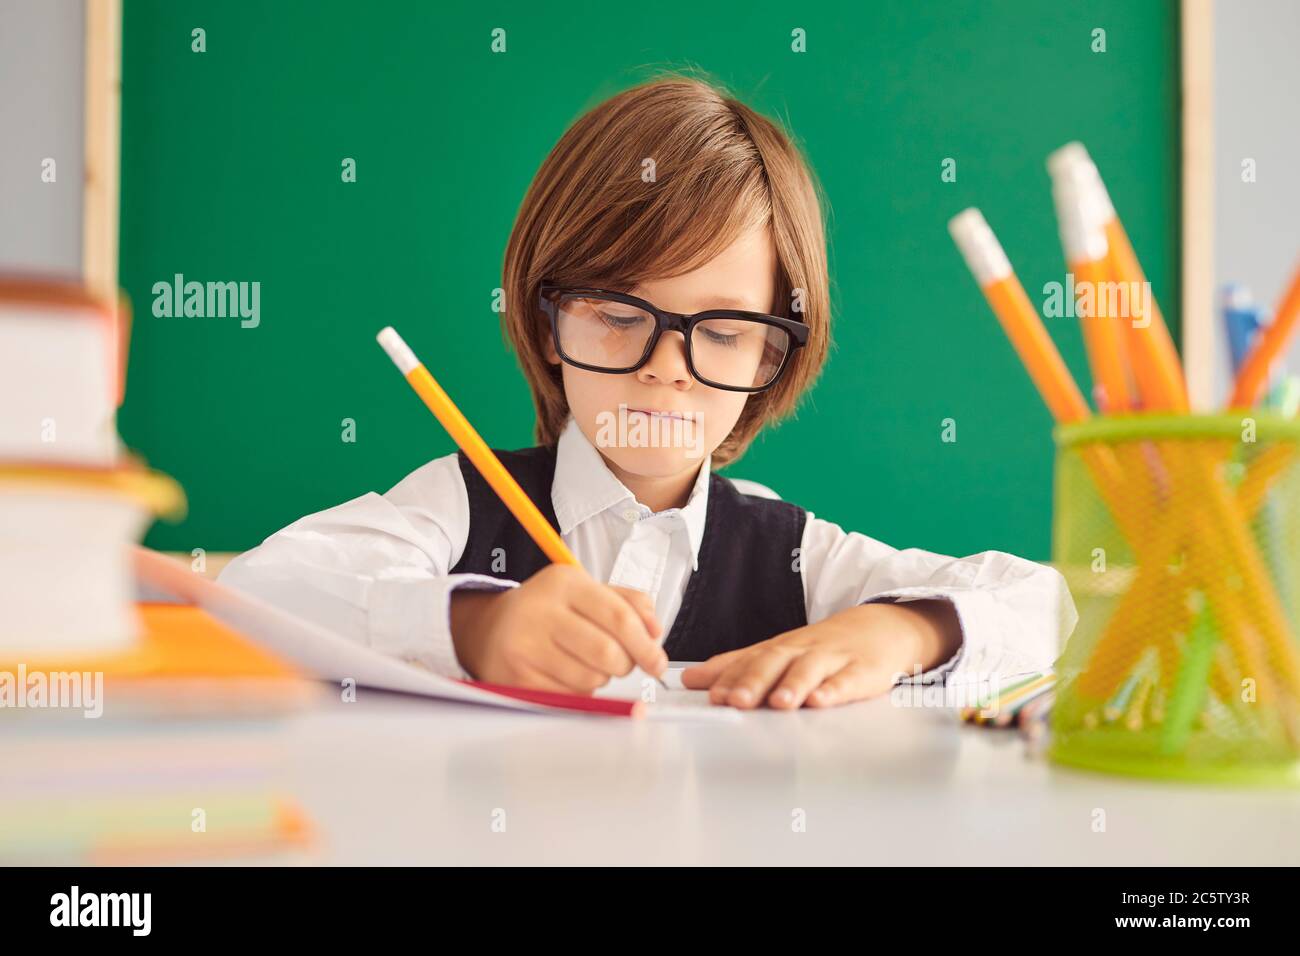 Schooling. A smart schoolboy with glasses writes a teacher assignment in a notebook at a table in the classroom. Stock Photo